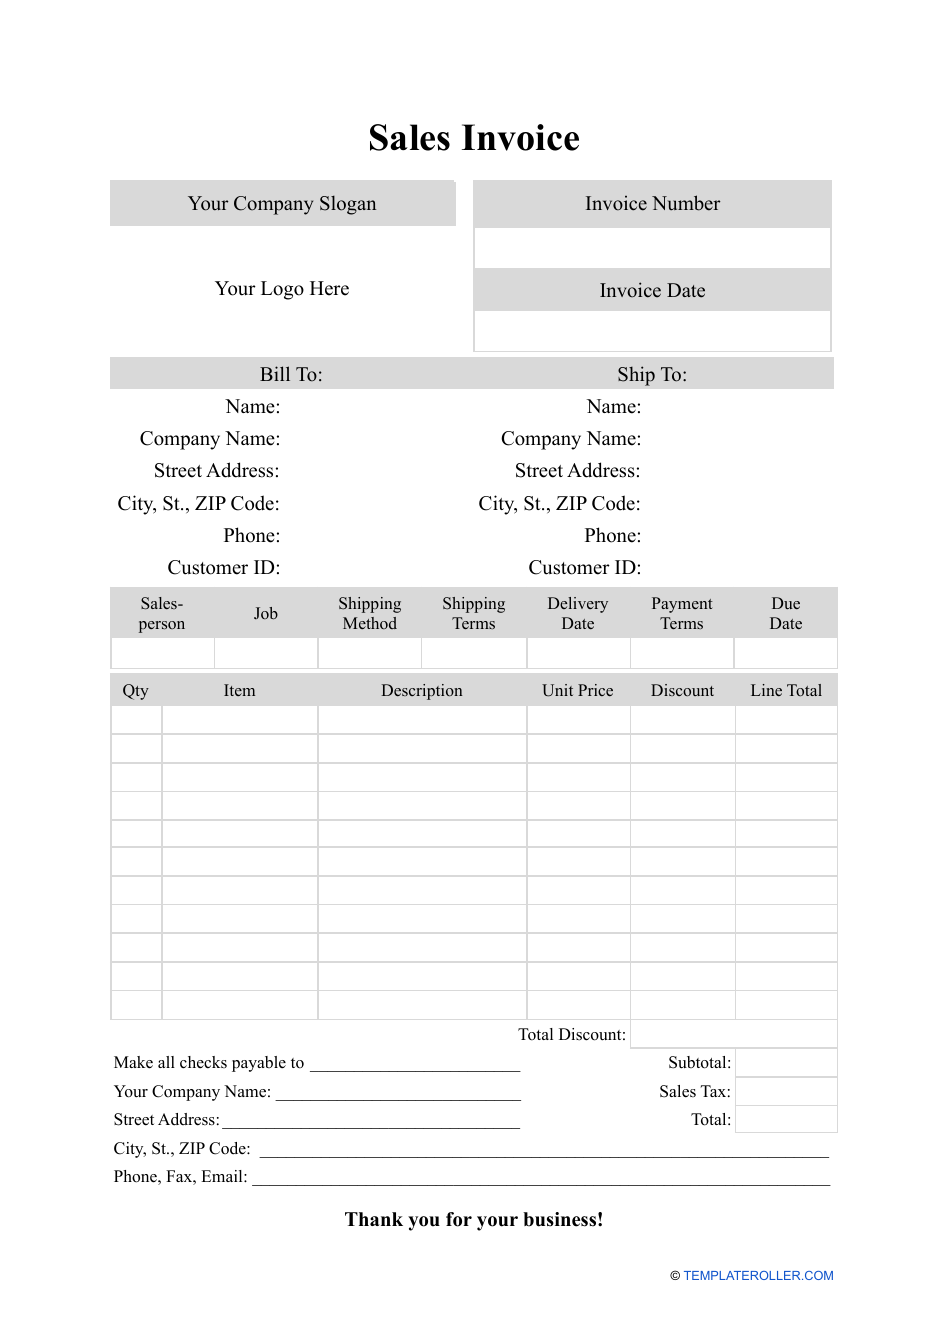 Sales Invoice Template Fill Out, Sign Online and Download PDF